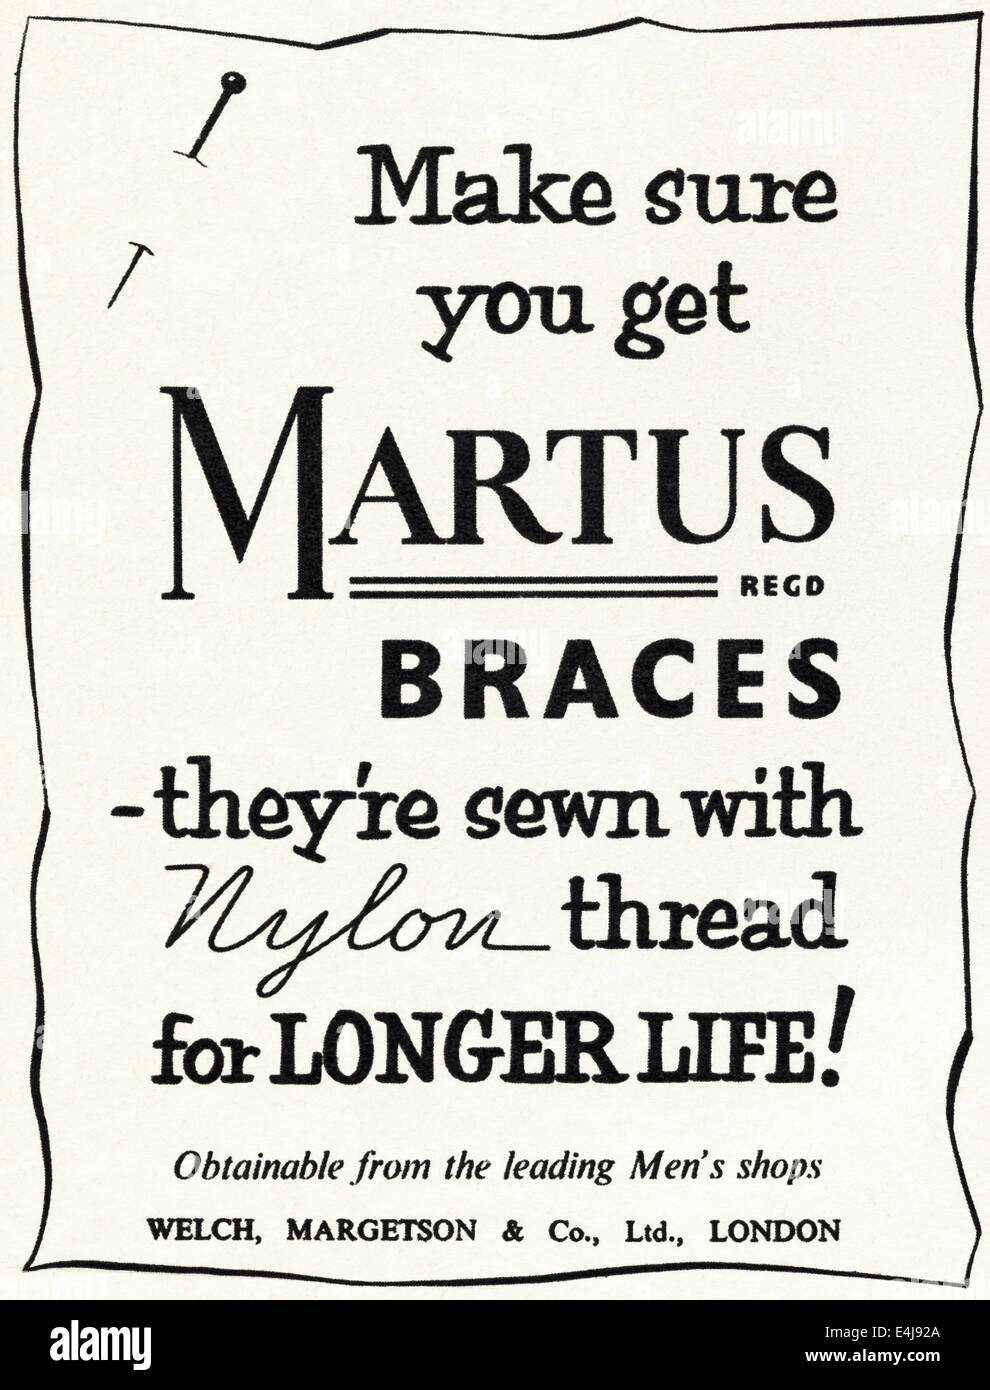 1950s advert for MARTUS braces in British magazine dated August 1956 Stock Photo